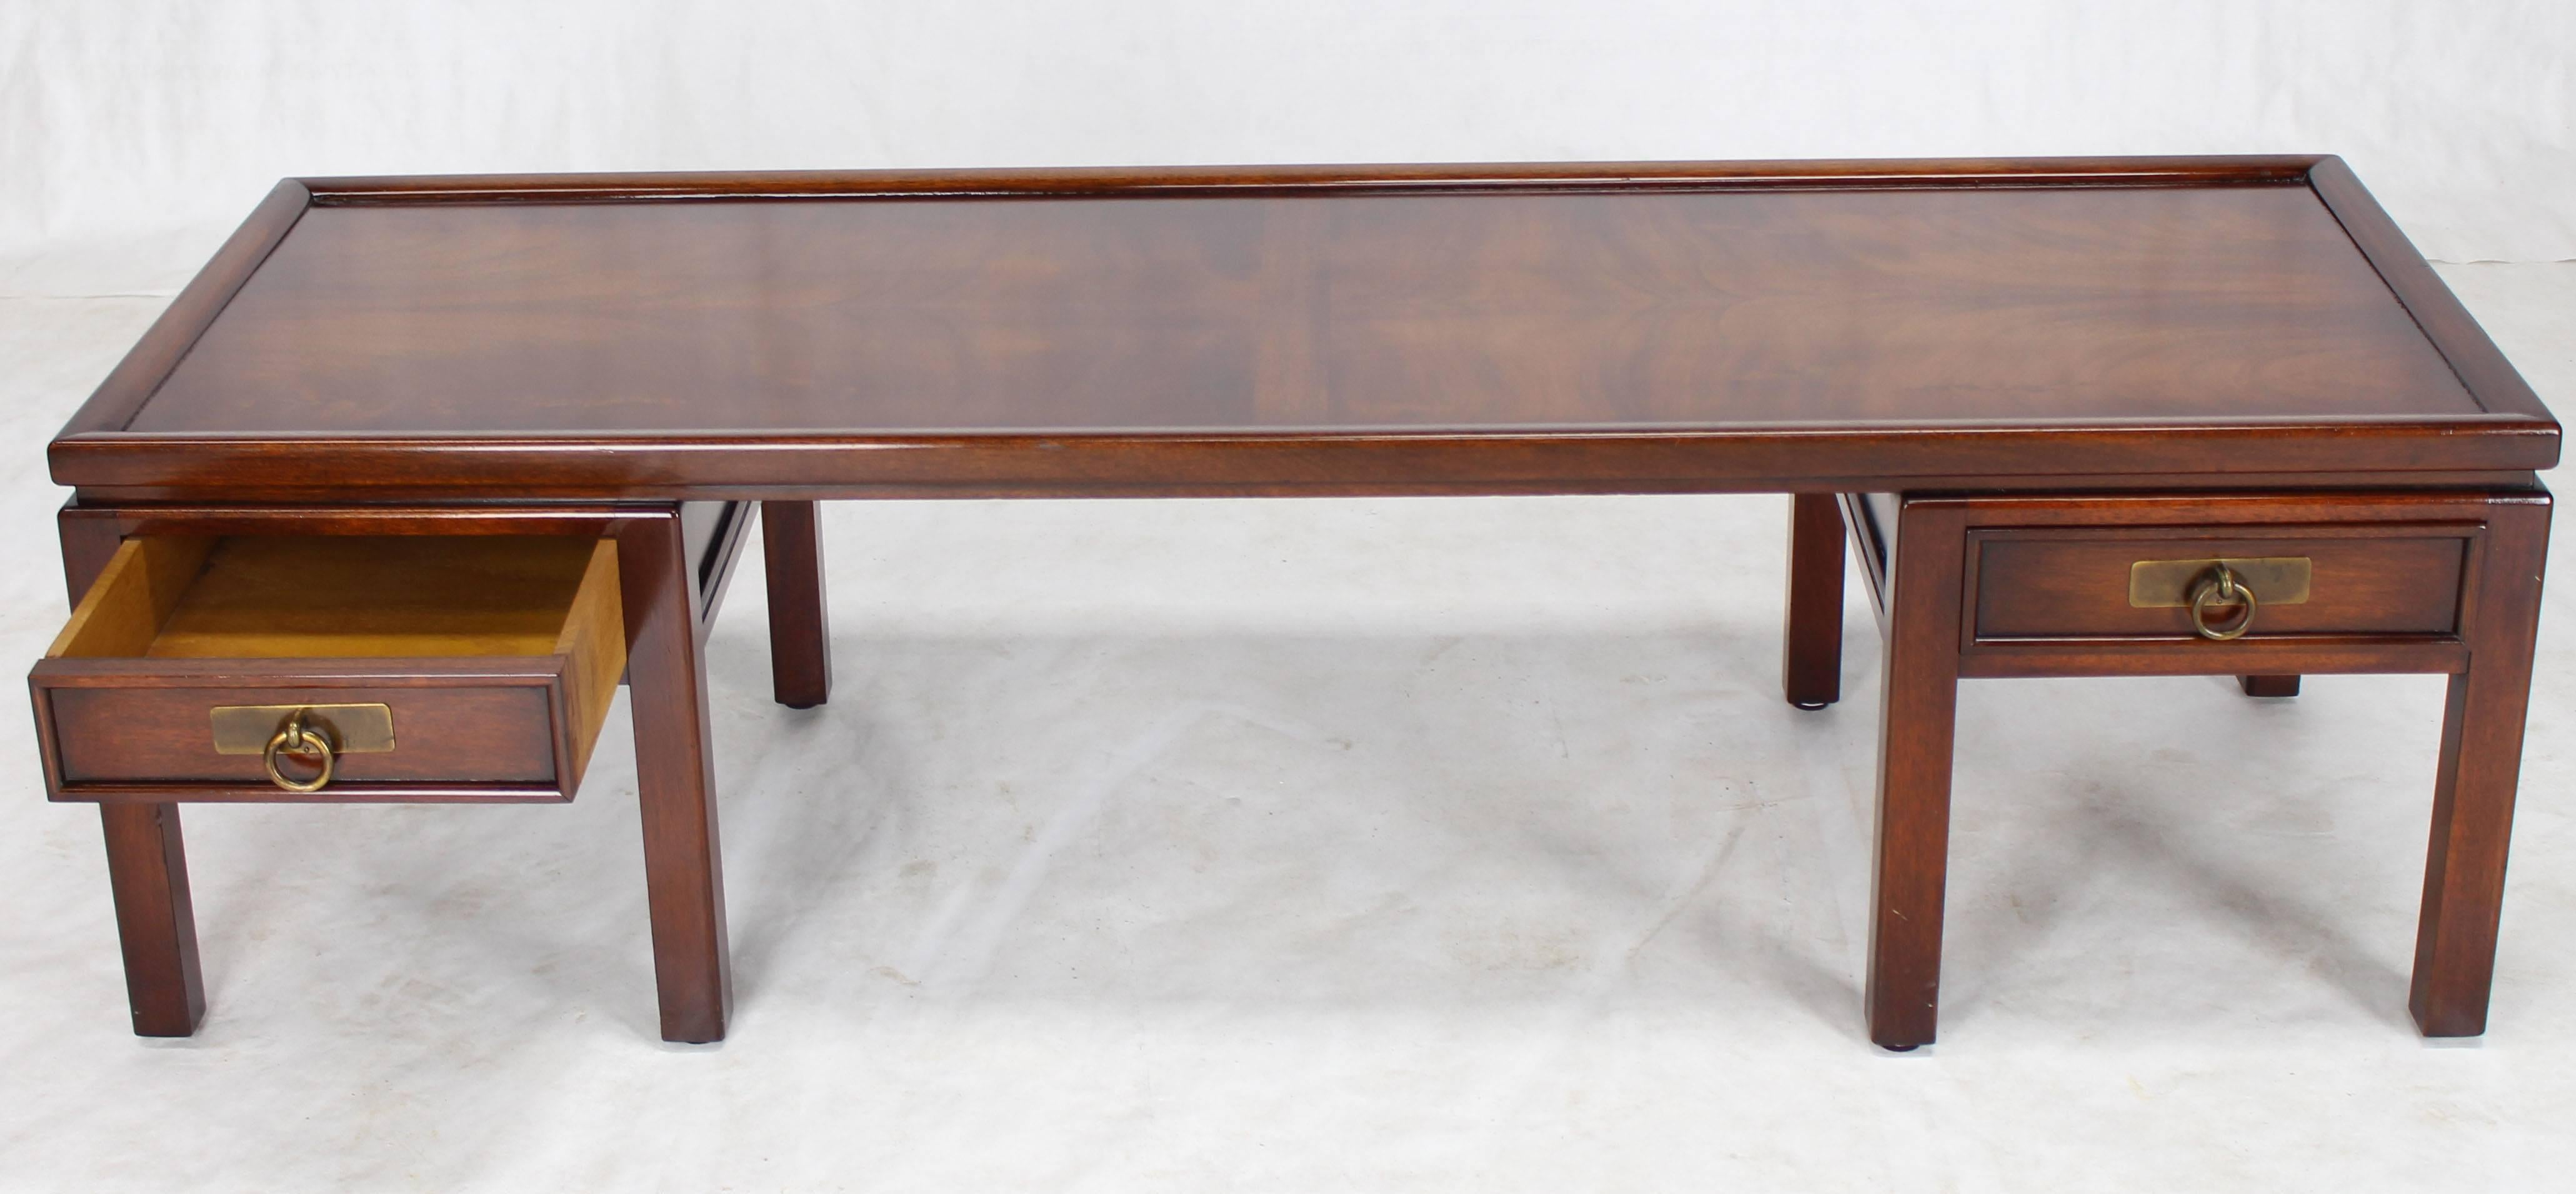 Mid-Century Modern double pedestal flame mahogany coffee table with two drawers.